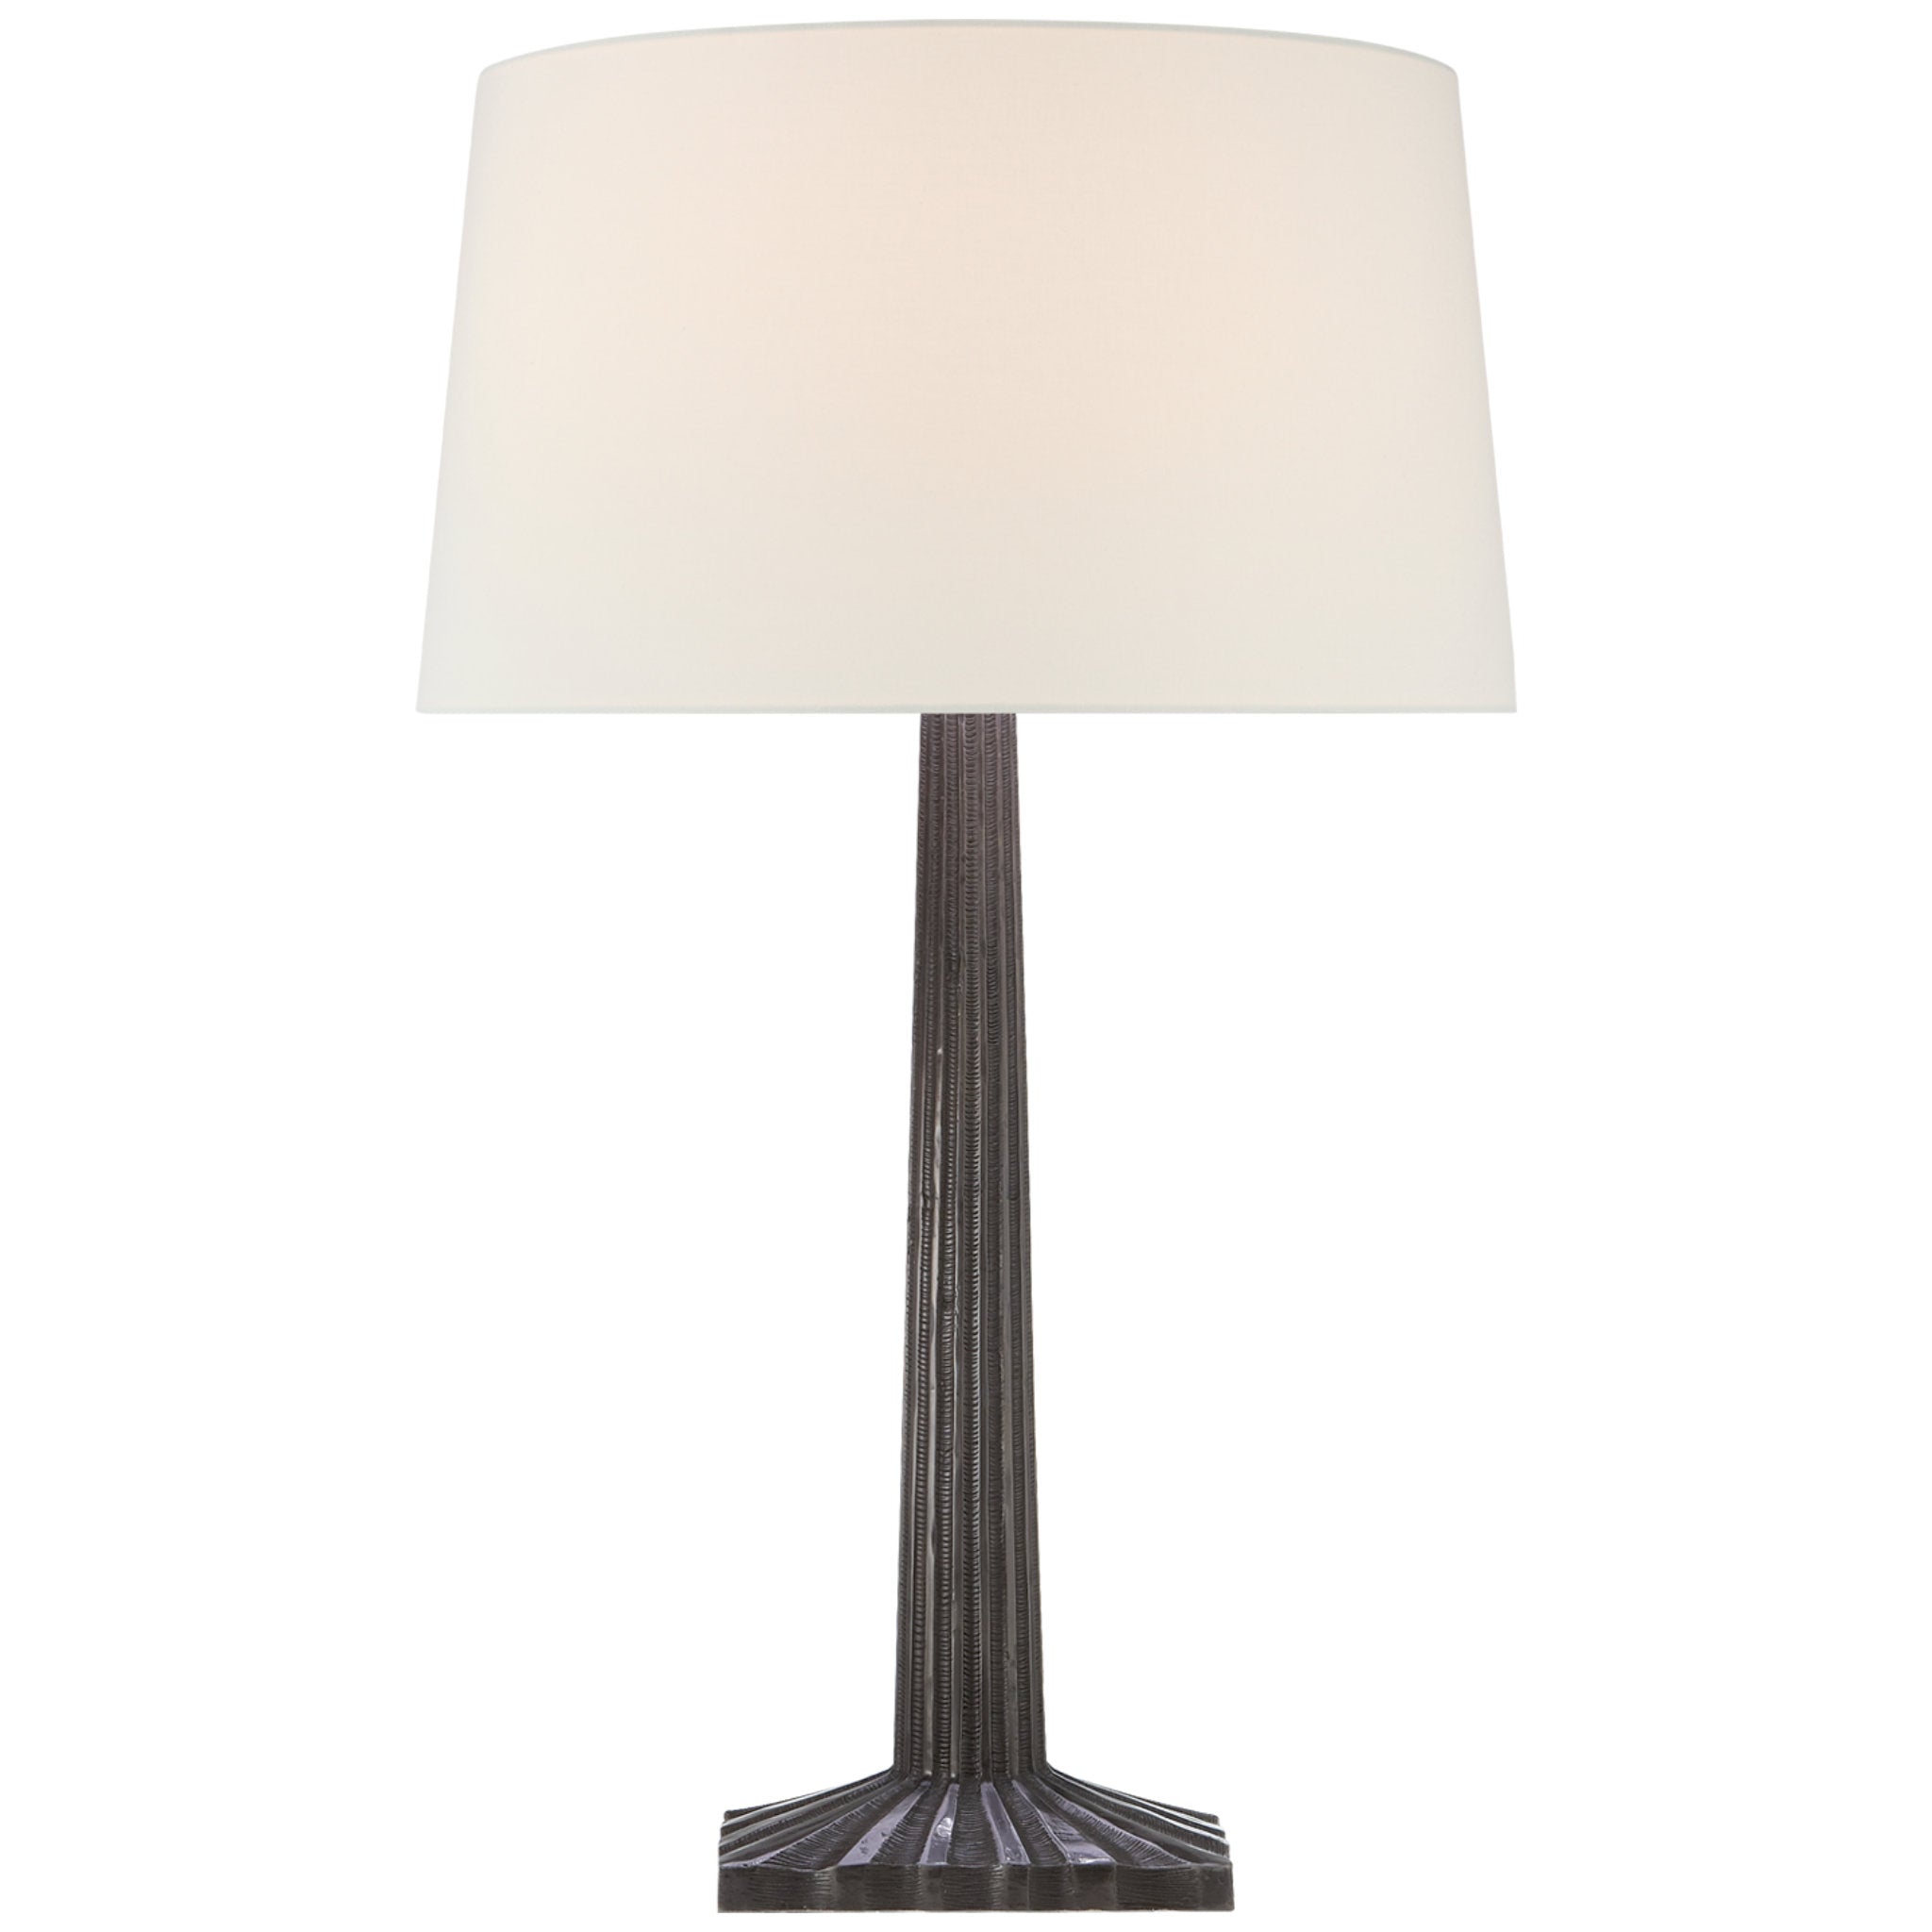 Chapman & Myers Strie Fluted Column Table Lamp in Aged Iron with Linen Shade